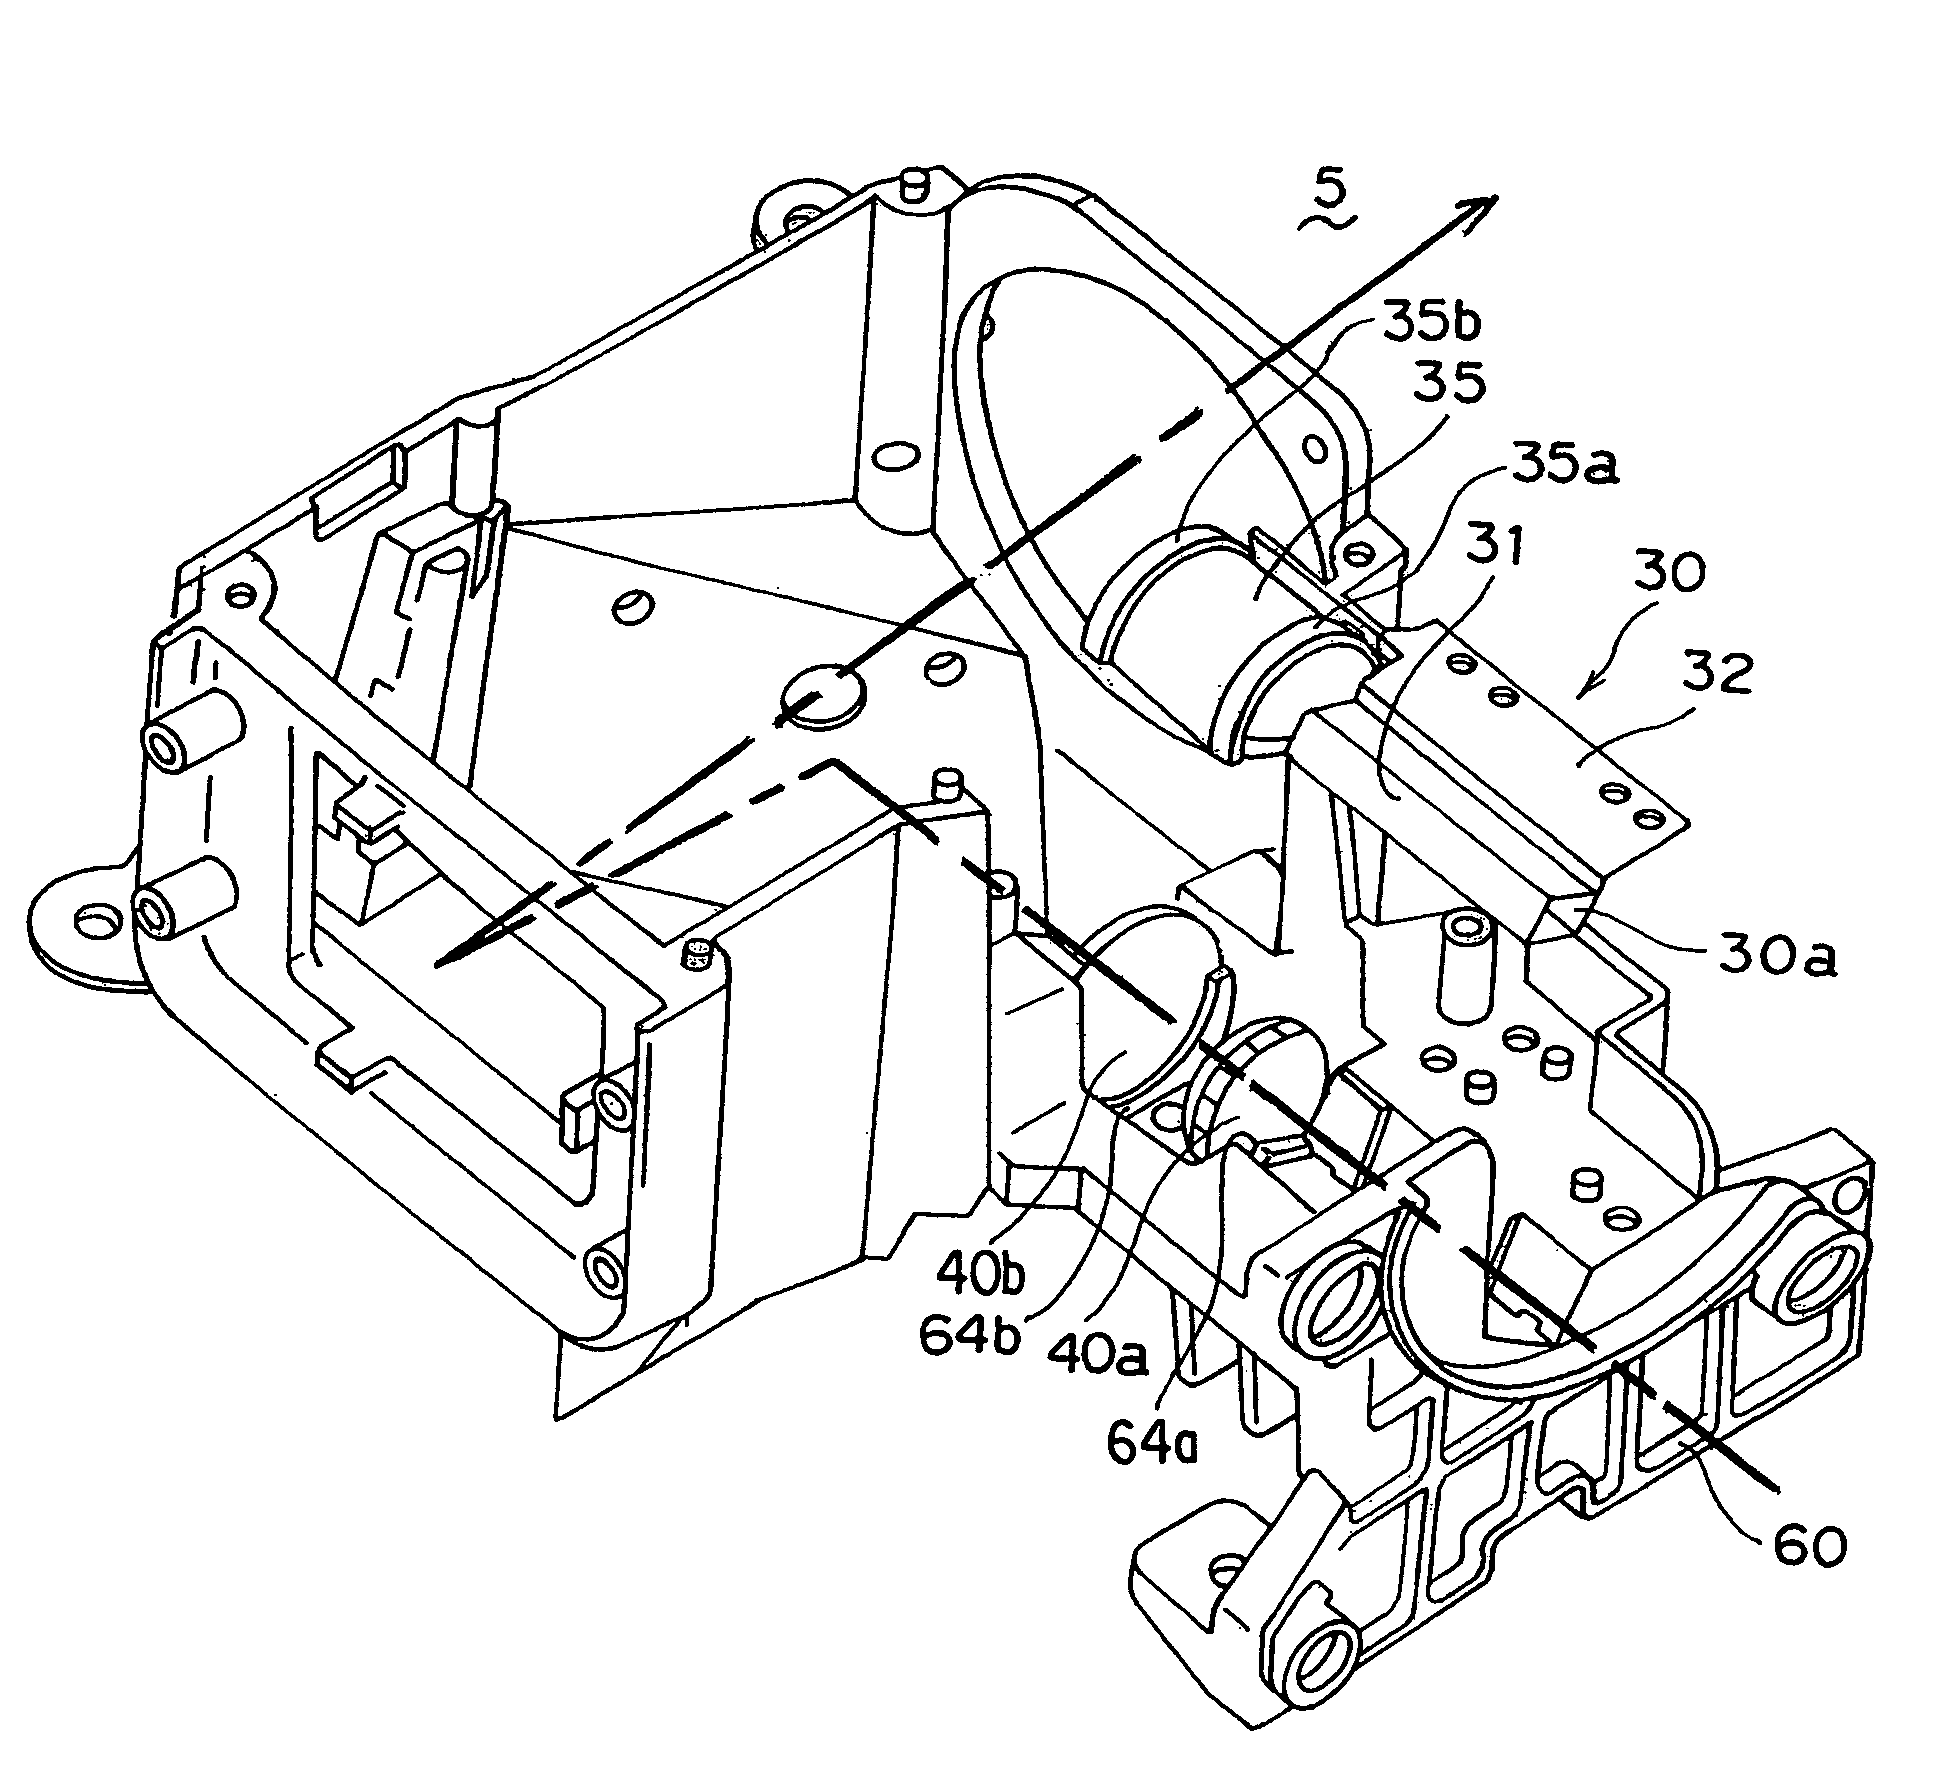 Image displaying projector with a light tunnel and light tunnel structure in an image displaying projector